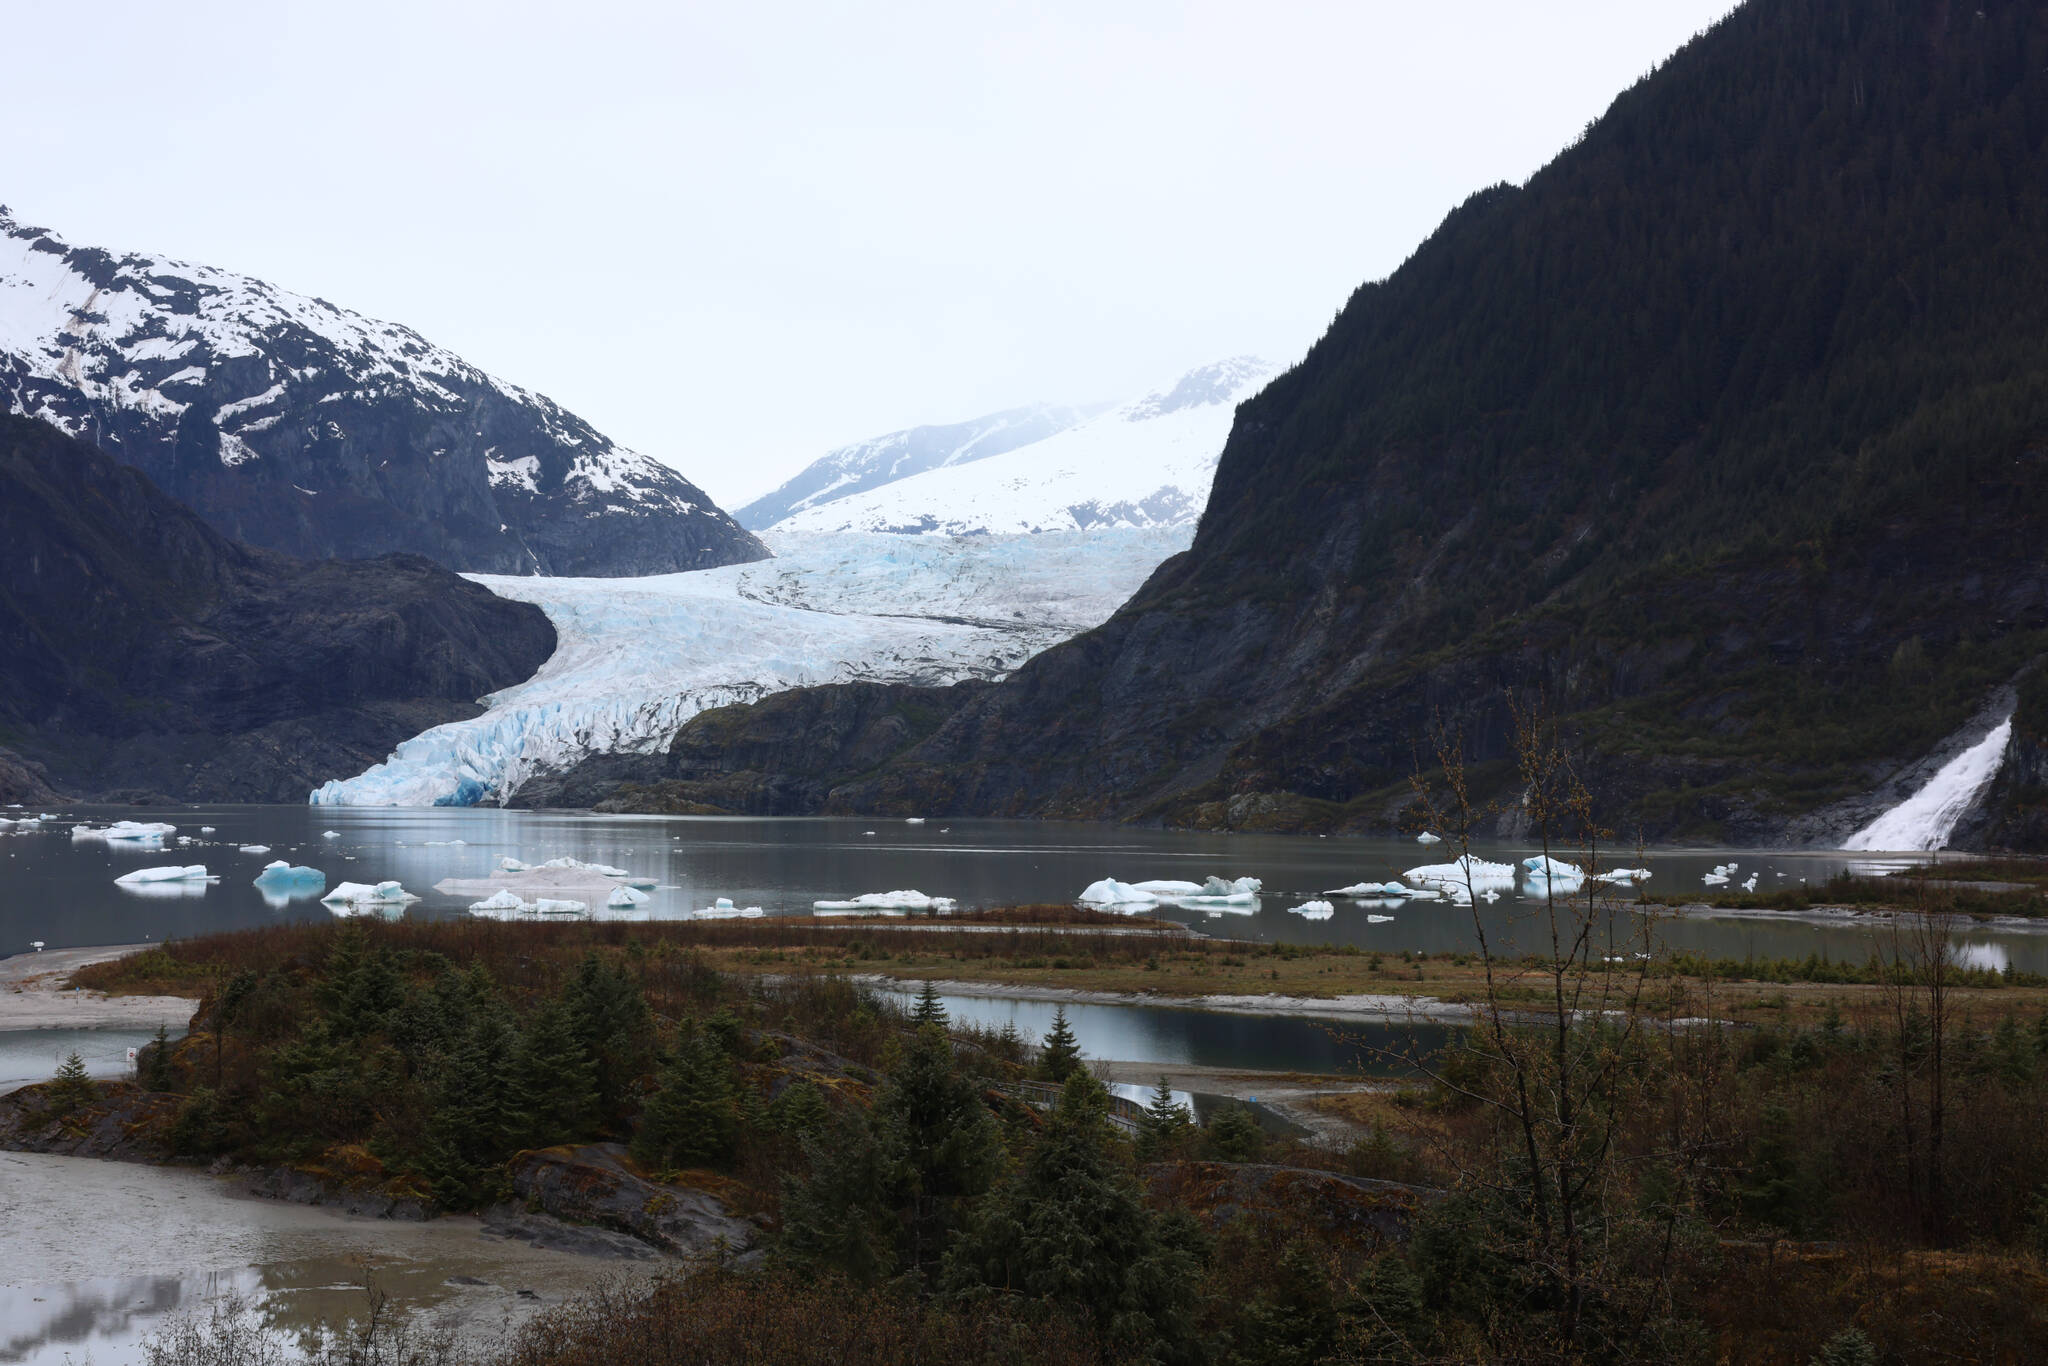 The Mendenhall Glacier, Photo Point and Nugget Falls are seen under cloudy skies Friday morning. The trails and recreation area around these heavily visited destinations are poised to change following the release of a final environmental impact statement. The U.S. Forest Service’s preferred alternative would nearly double the recreation area’s capacity in anticipation of demand over the next 30 years. (Ben Hohenstatt / Juneau Empire)